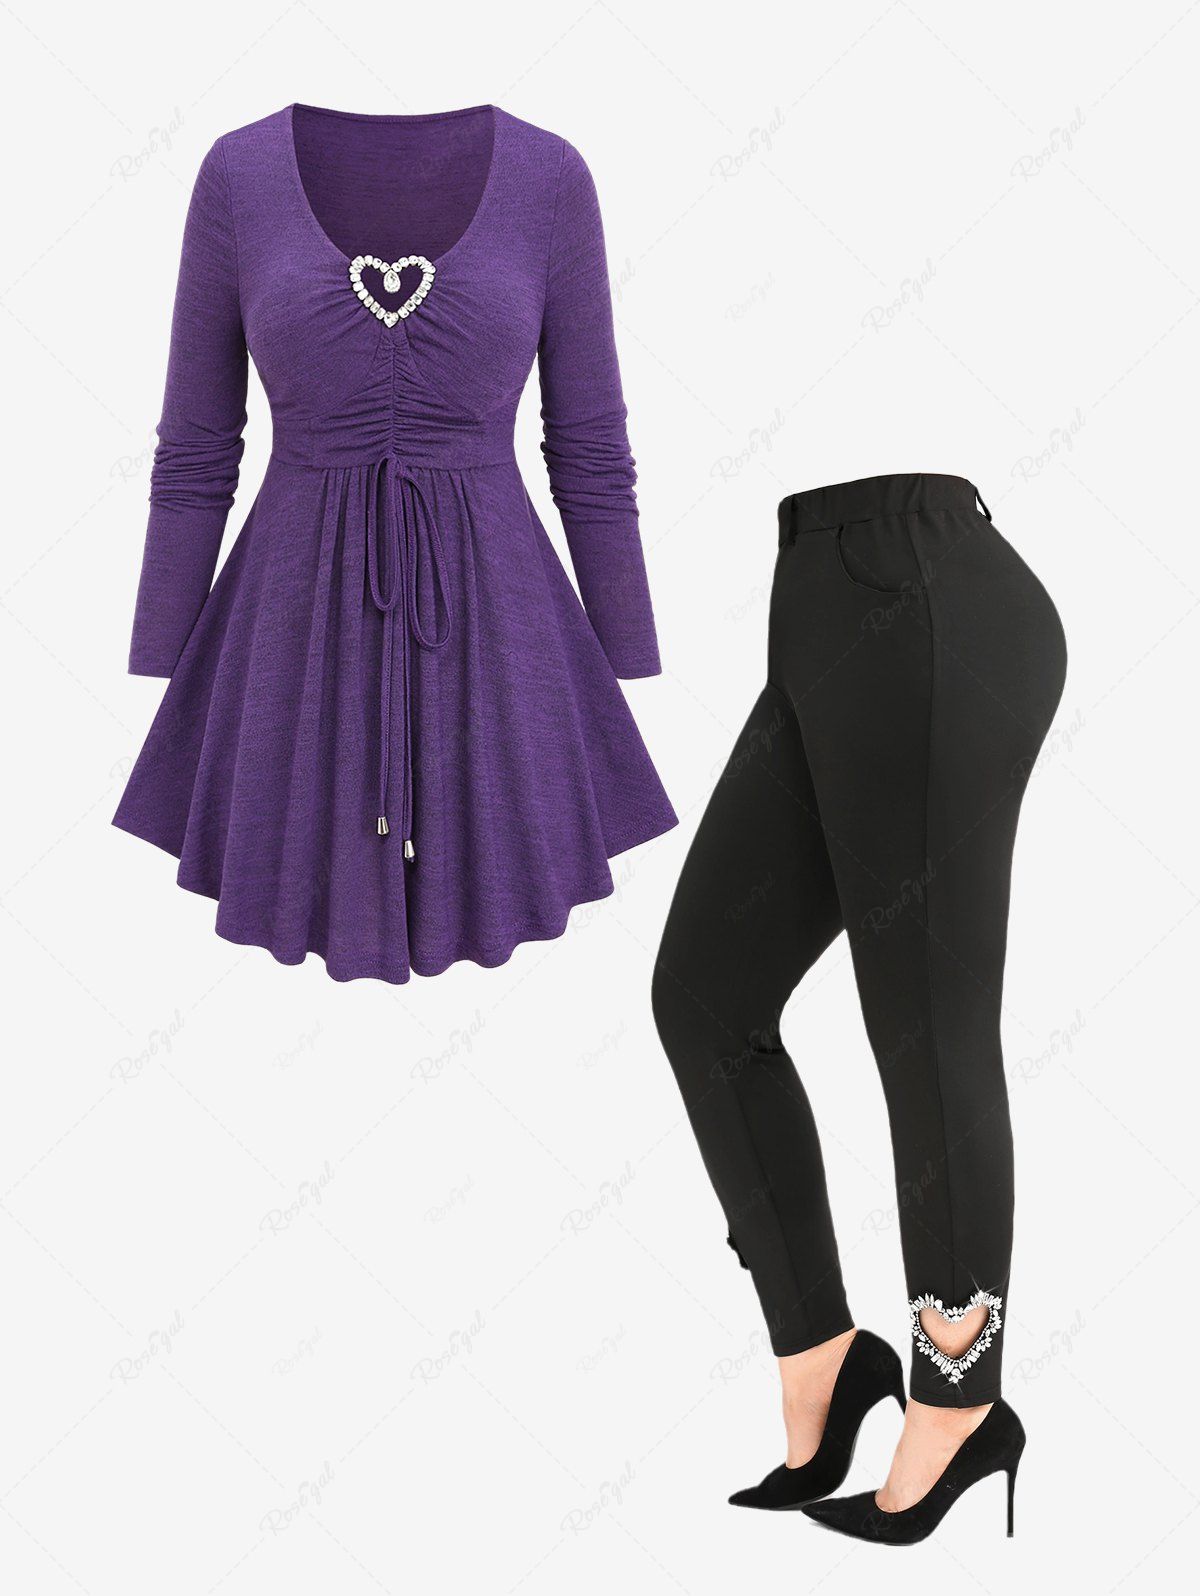 Shop Sparkling Heart Cinched T-shirt and Pockets Skinny Leggings Plus Size Outfit  